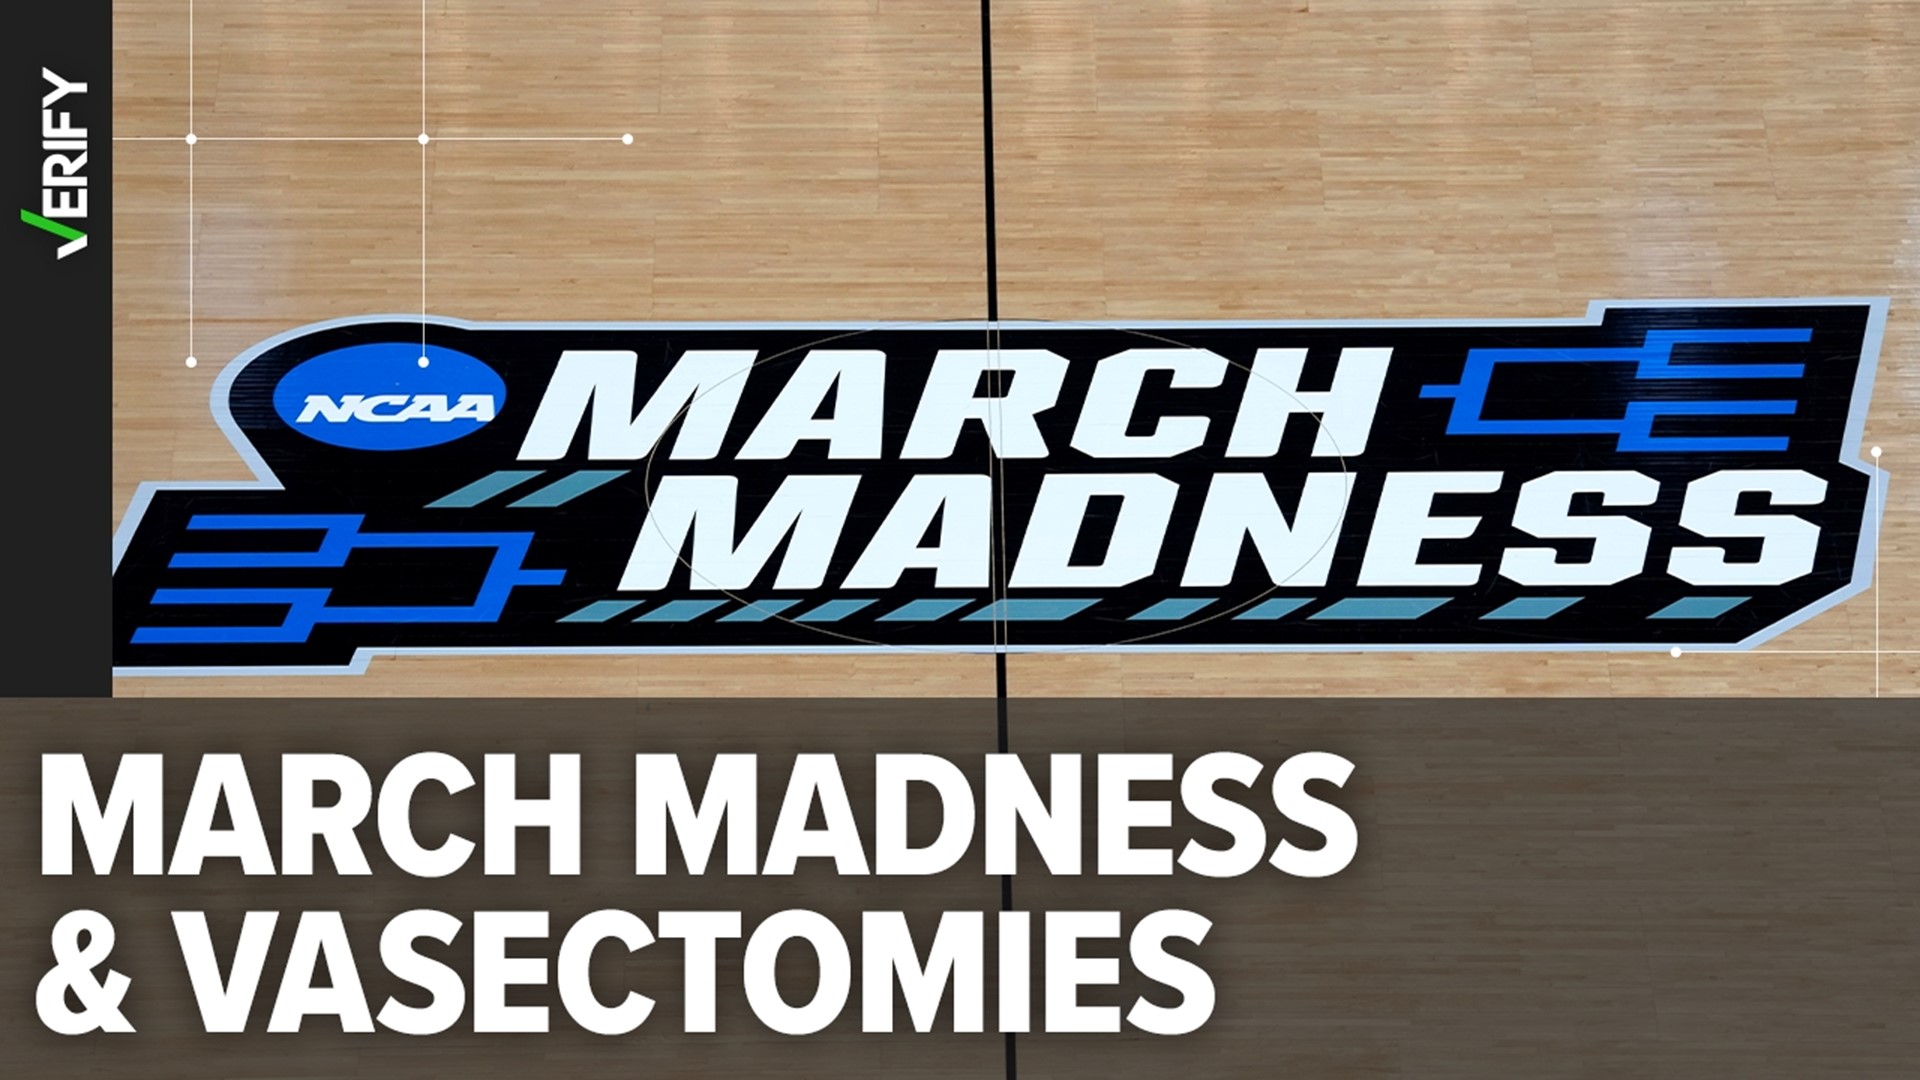 Most men get vasectomies before the March Madness NCAA basketball tournament. That is so they can recover while watching college hoops.